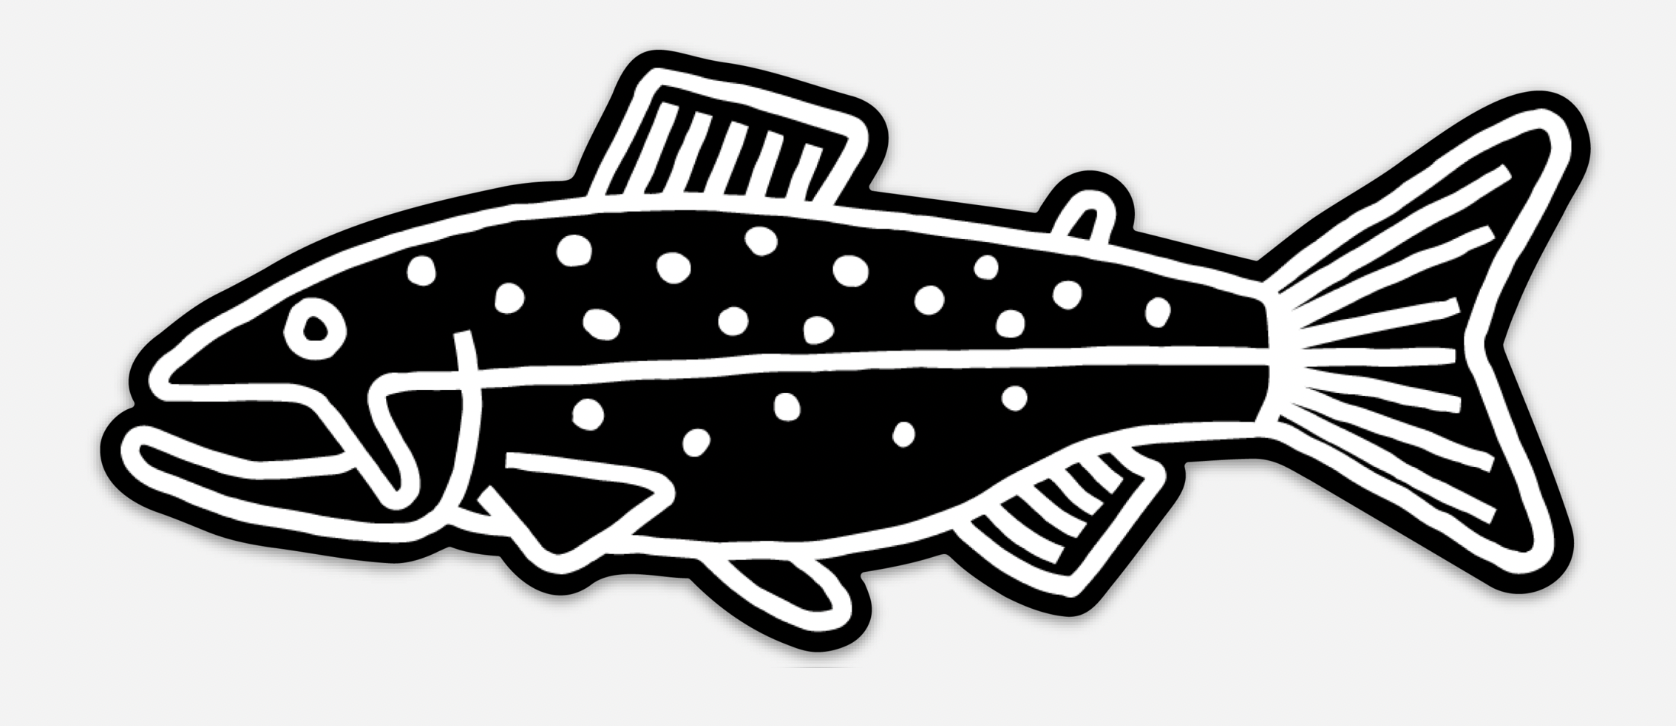 Black and White Trout Doodle Sticker